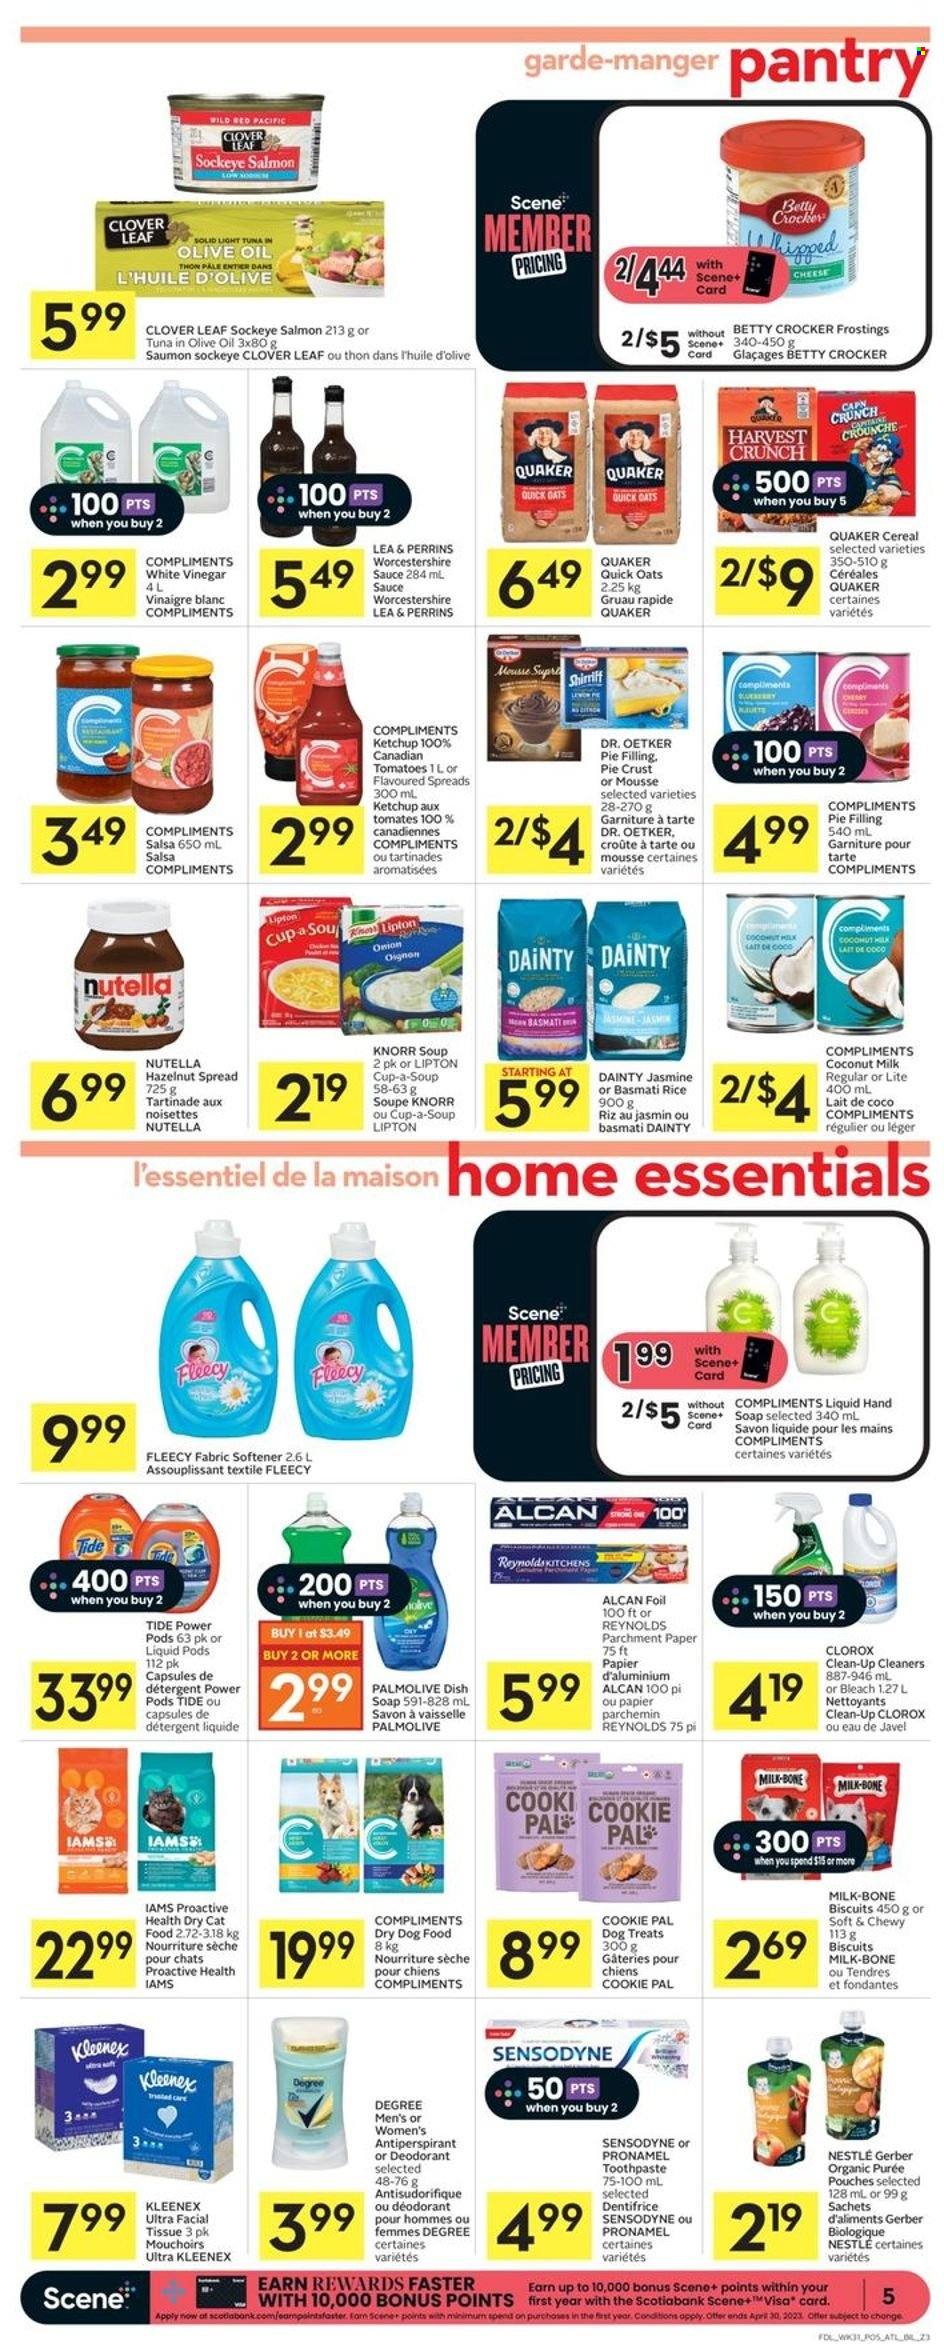 thumbnail - Co-op Flyer - December 01, 2022 - December 07, 2022 - Sales products - tomatoes, soup, sauce, Quaker, cheese, Dr. Oetker, Clover, biscuit, Gerber, pie crust, pie filling, oats, coconut milk, light tuna, cereals, Quick Oats, basmati rice, rice, worcestershire sauce, salsa, vinegar, hazelnut spread, Cerés, baby food pouch, Kleenex, tissues, bleach, Clorox, Tide, fabric softener, Palmolive, soap, toothpaste, anti-perspirant, animal food, dry dog food, cat food, dog food, dry cat food, Iams, detergent, Nestlé, ketchup, Nutella, Sensodyne, Lipton, Knorr, deodorant. Page 5.